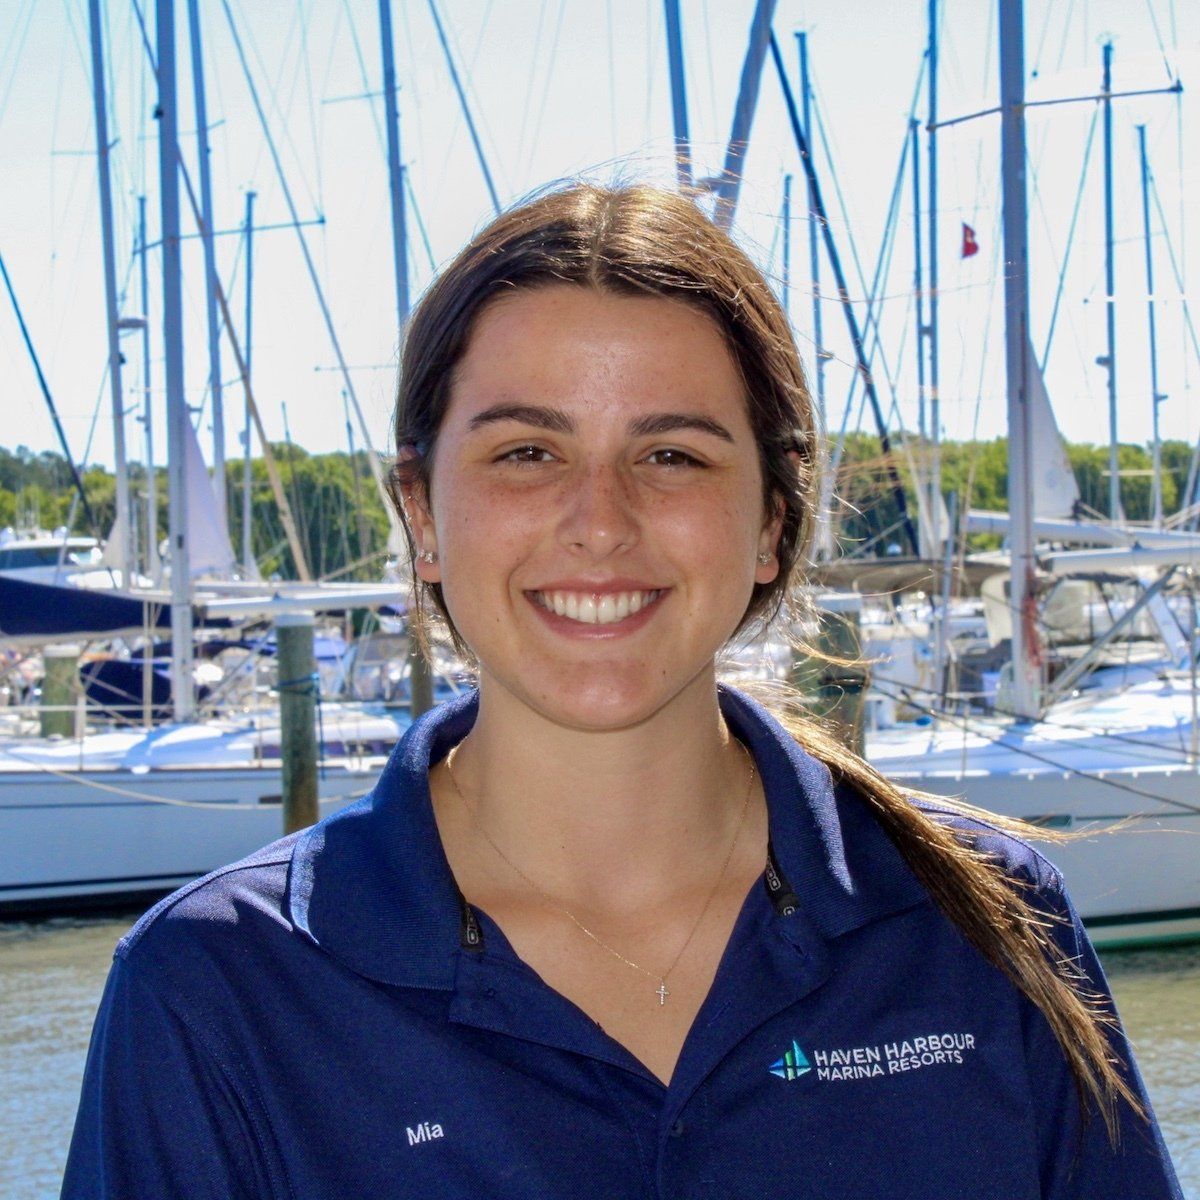 Female employee pictured outside in front of sailboats